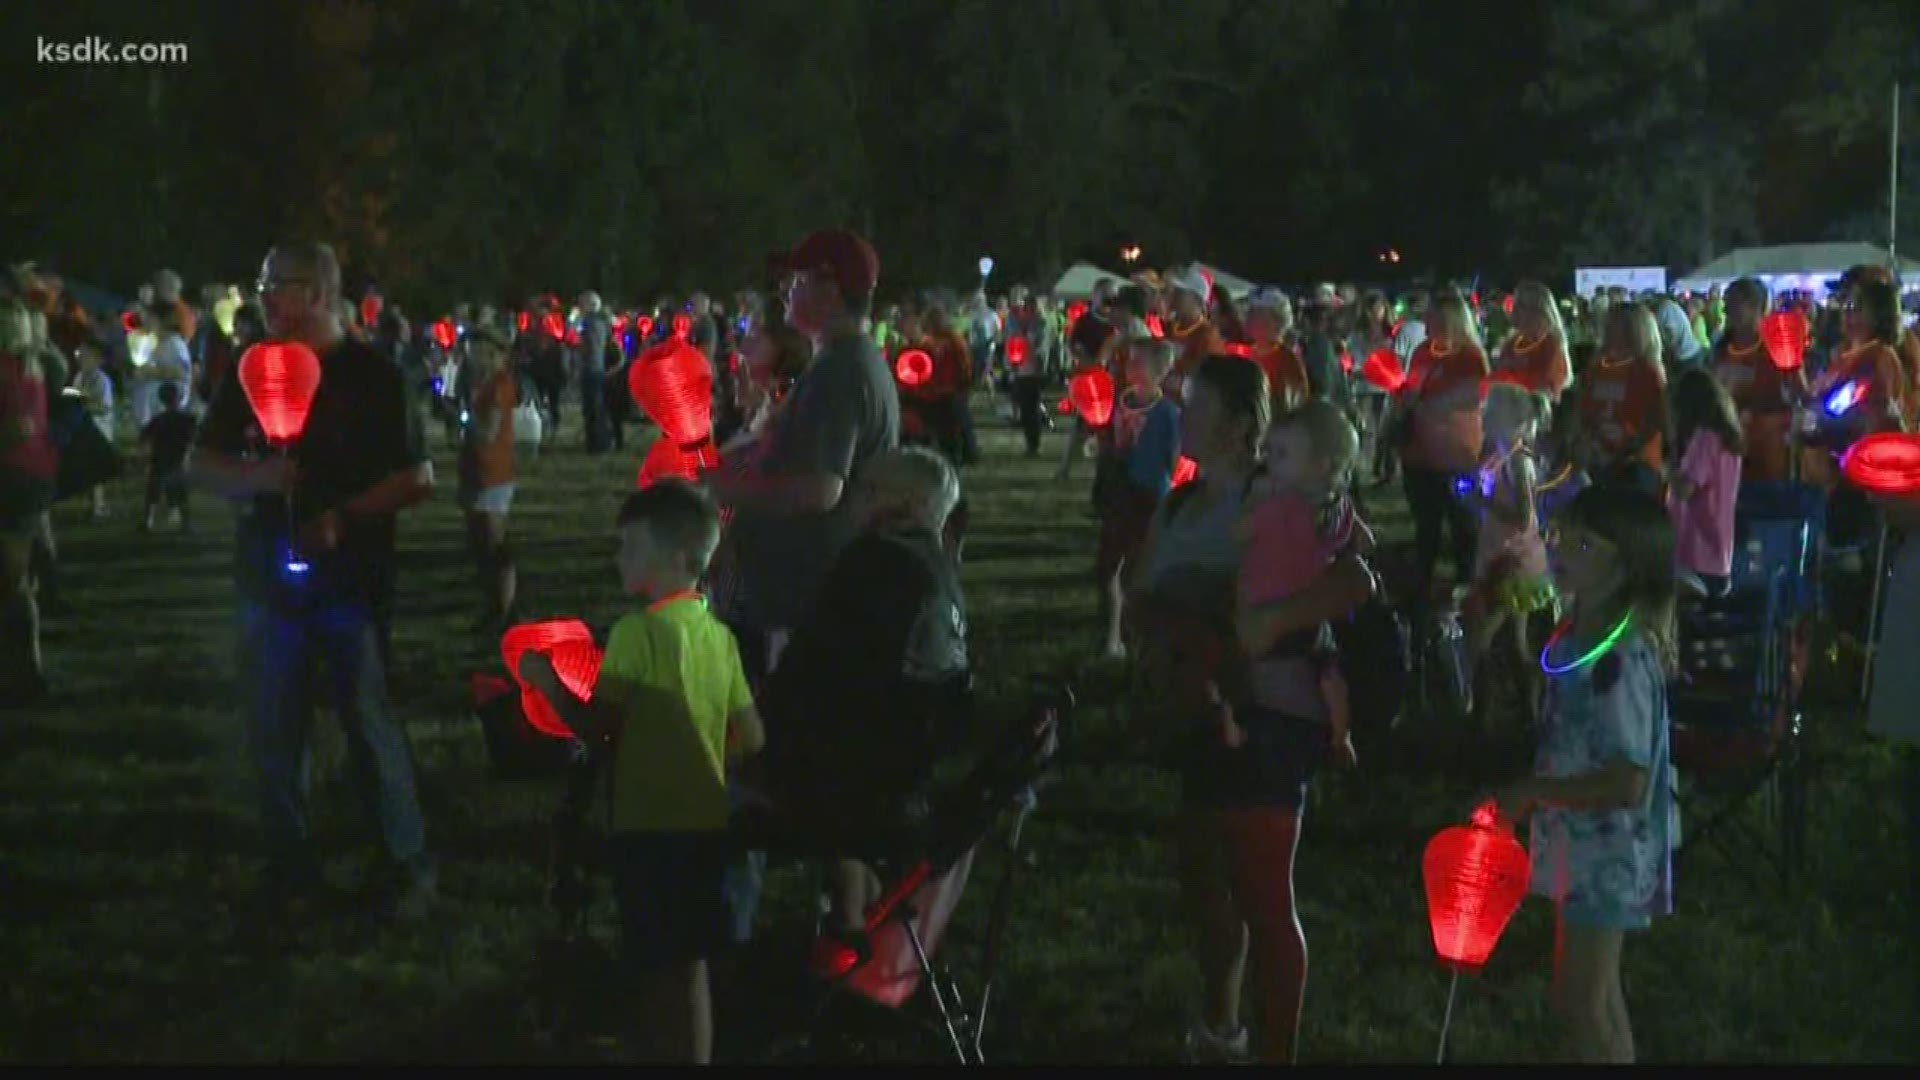 Survivors, supporters and families gathered at the Leukemia & Lymphoma Society's Light the Night event. It was all to shed light and hope.